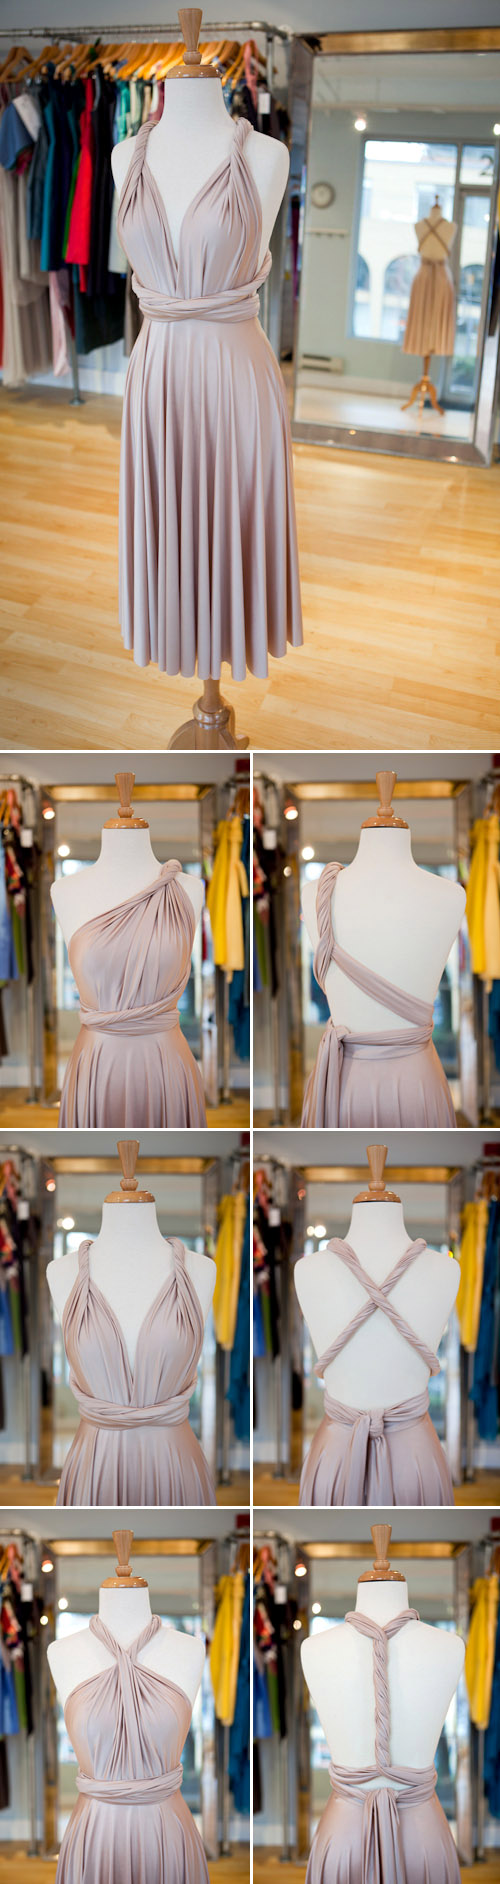 Two Birds Bridesmaids dress giveaway from Bella Bridesmaid Seattle, photos by Junebug Weddings